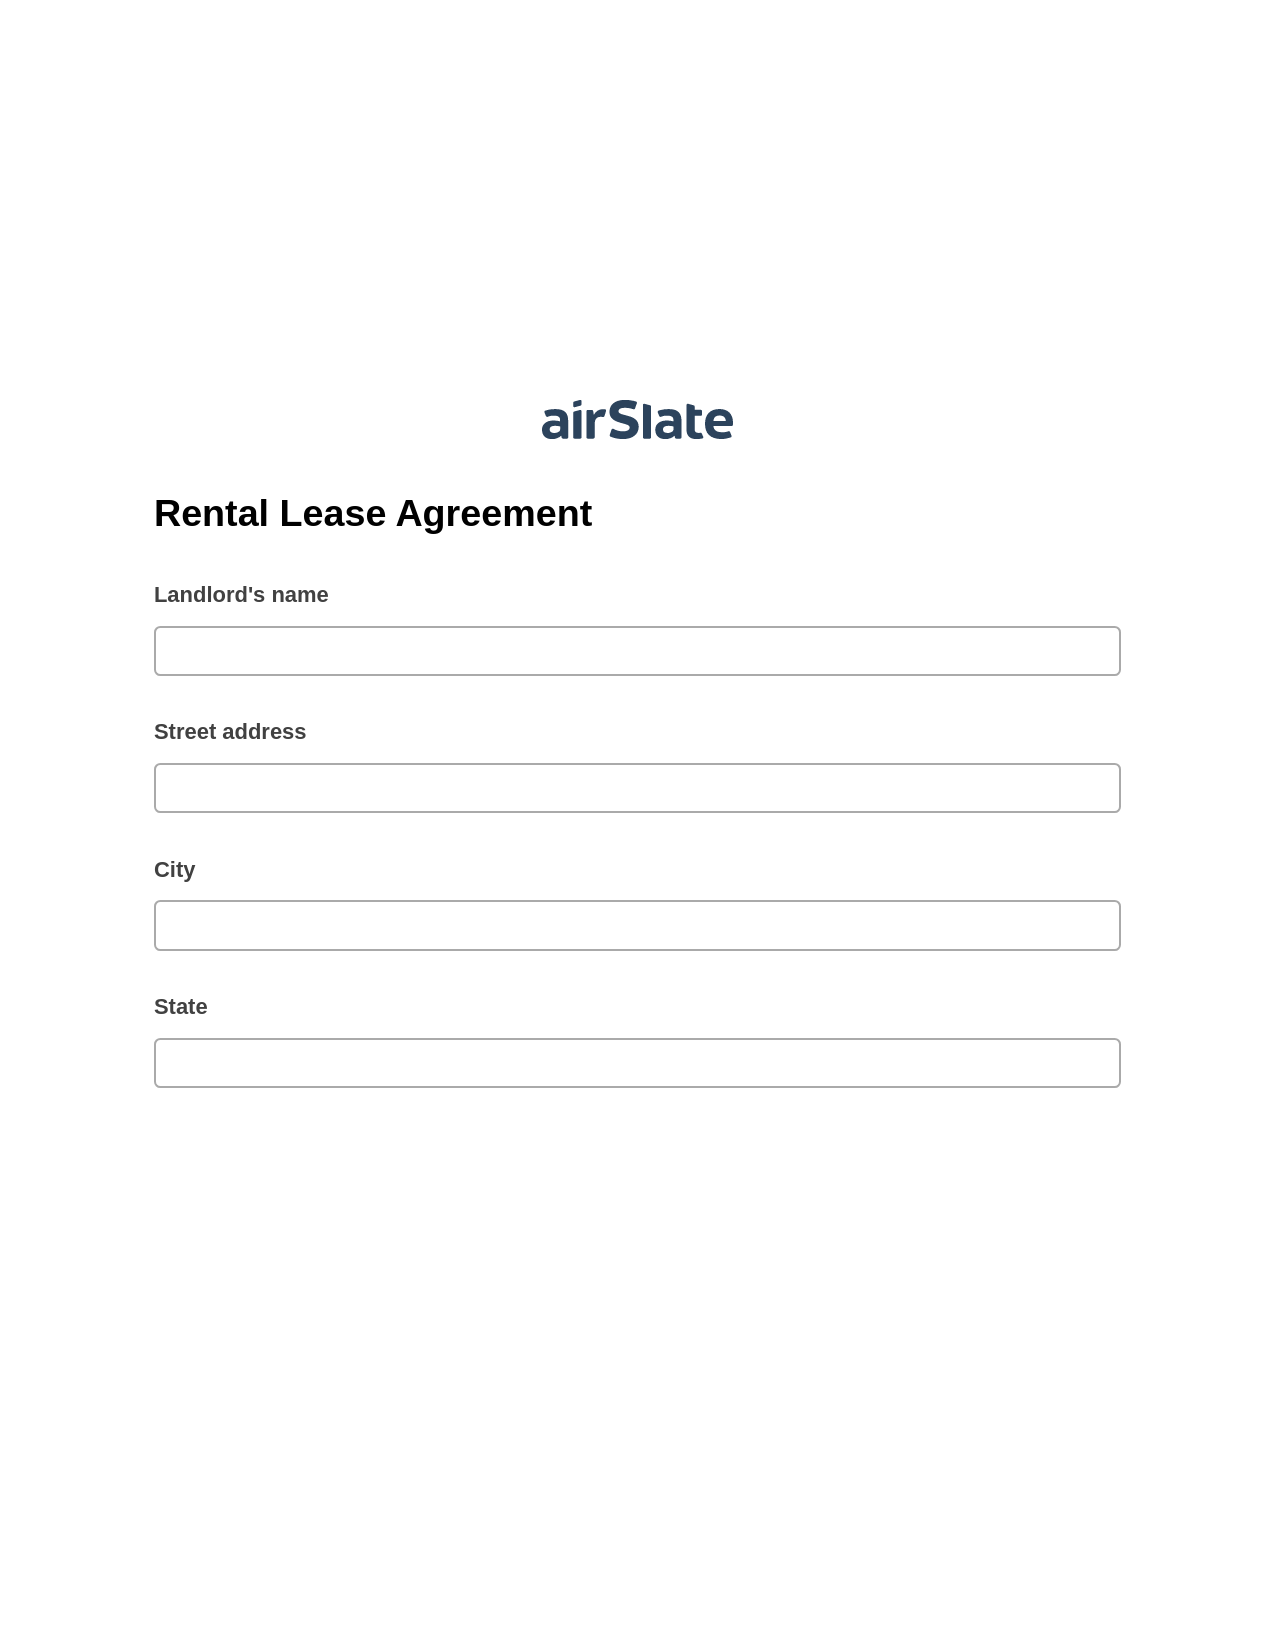 Rental Lease Agreement Pre-fill Dropdown from Airtable, Slack Notification Bot, Dropbox Bot